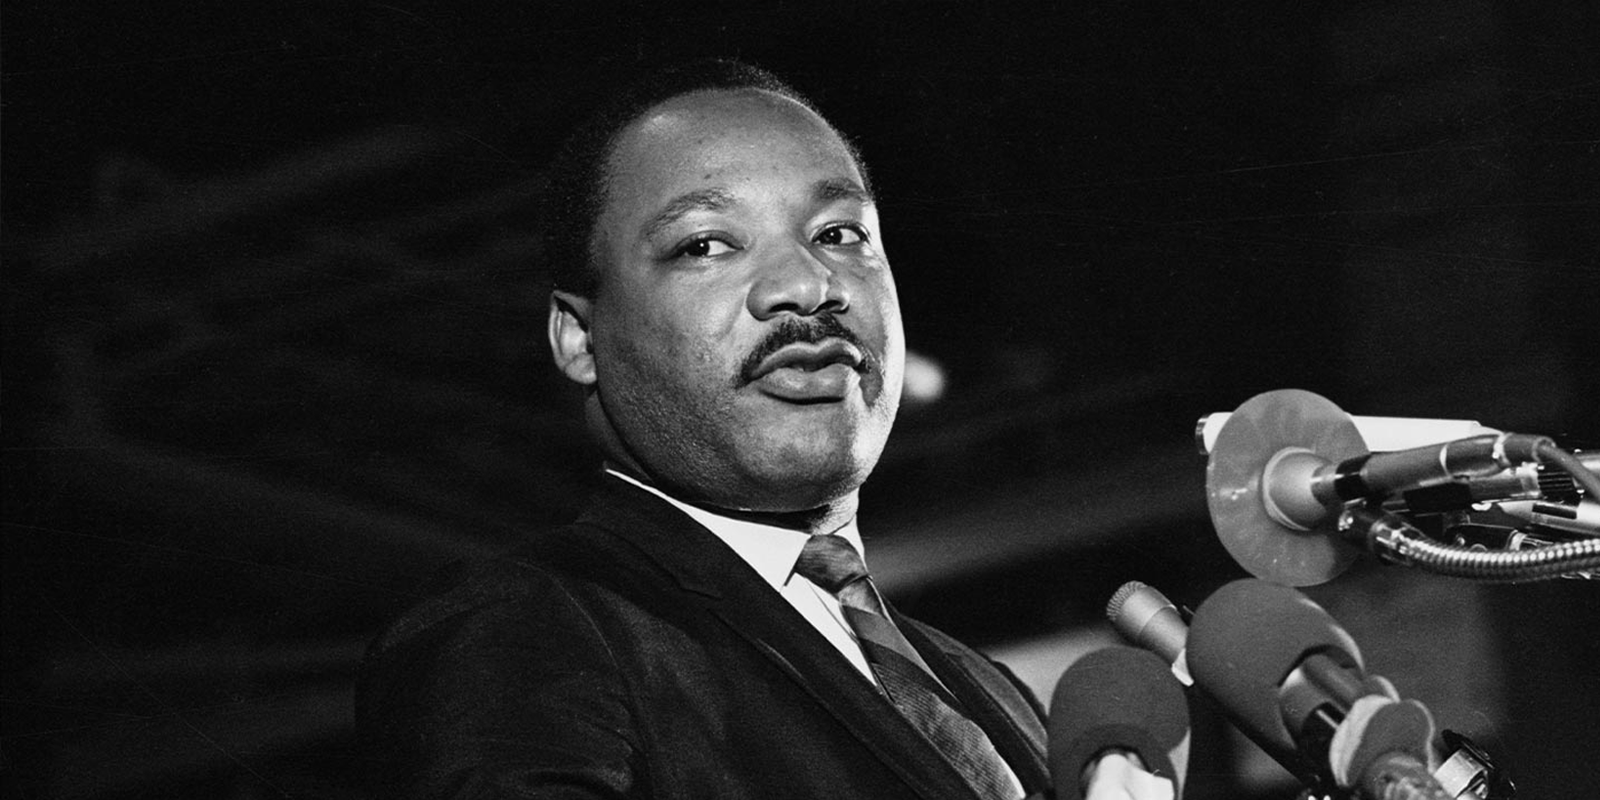 Dr. King’s last campaign was an AFSCME campaign